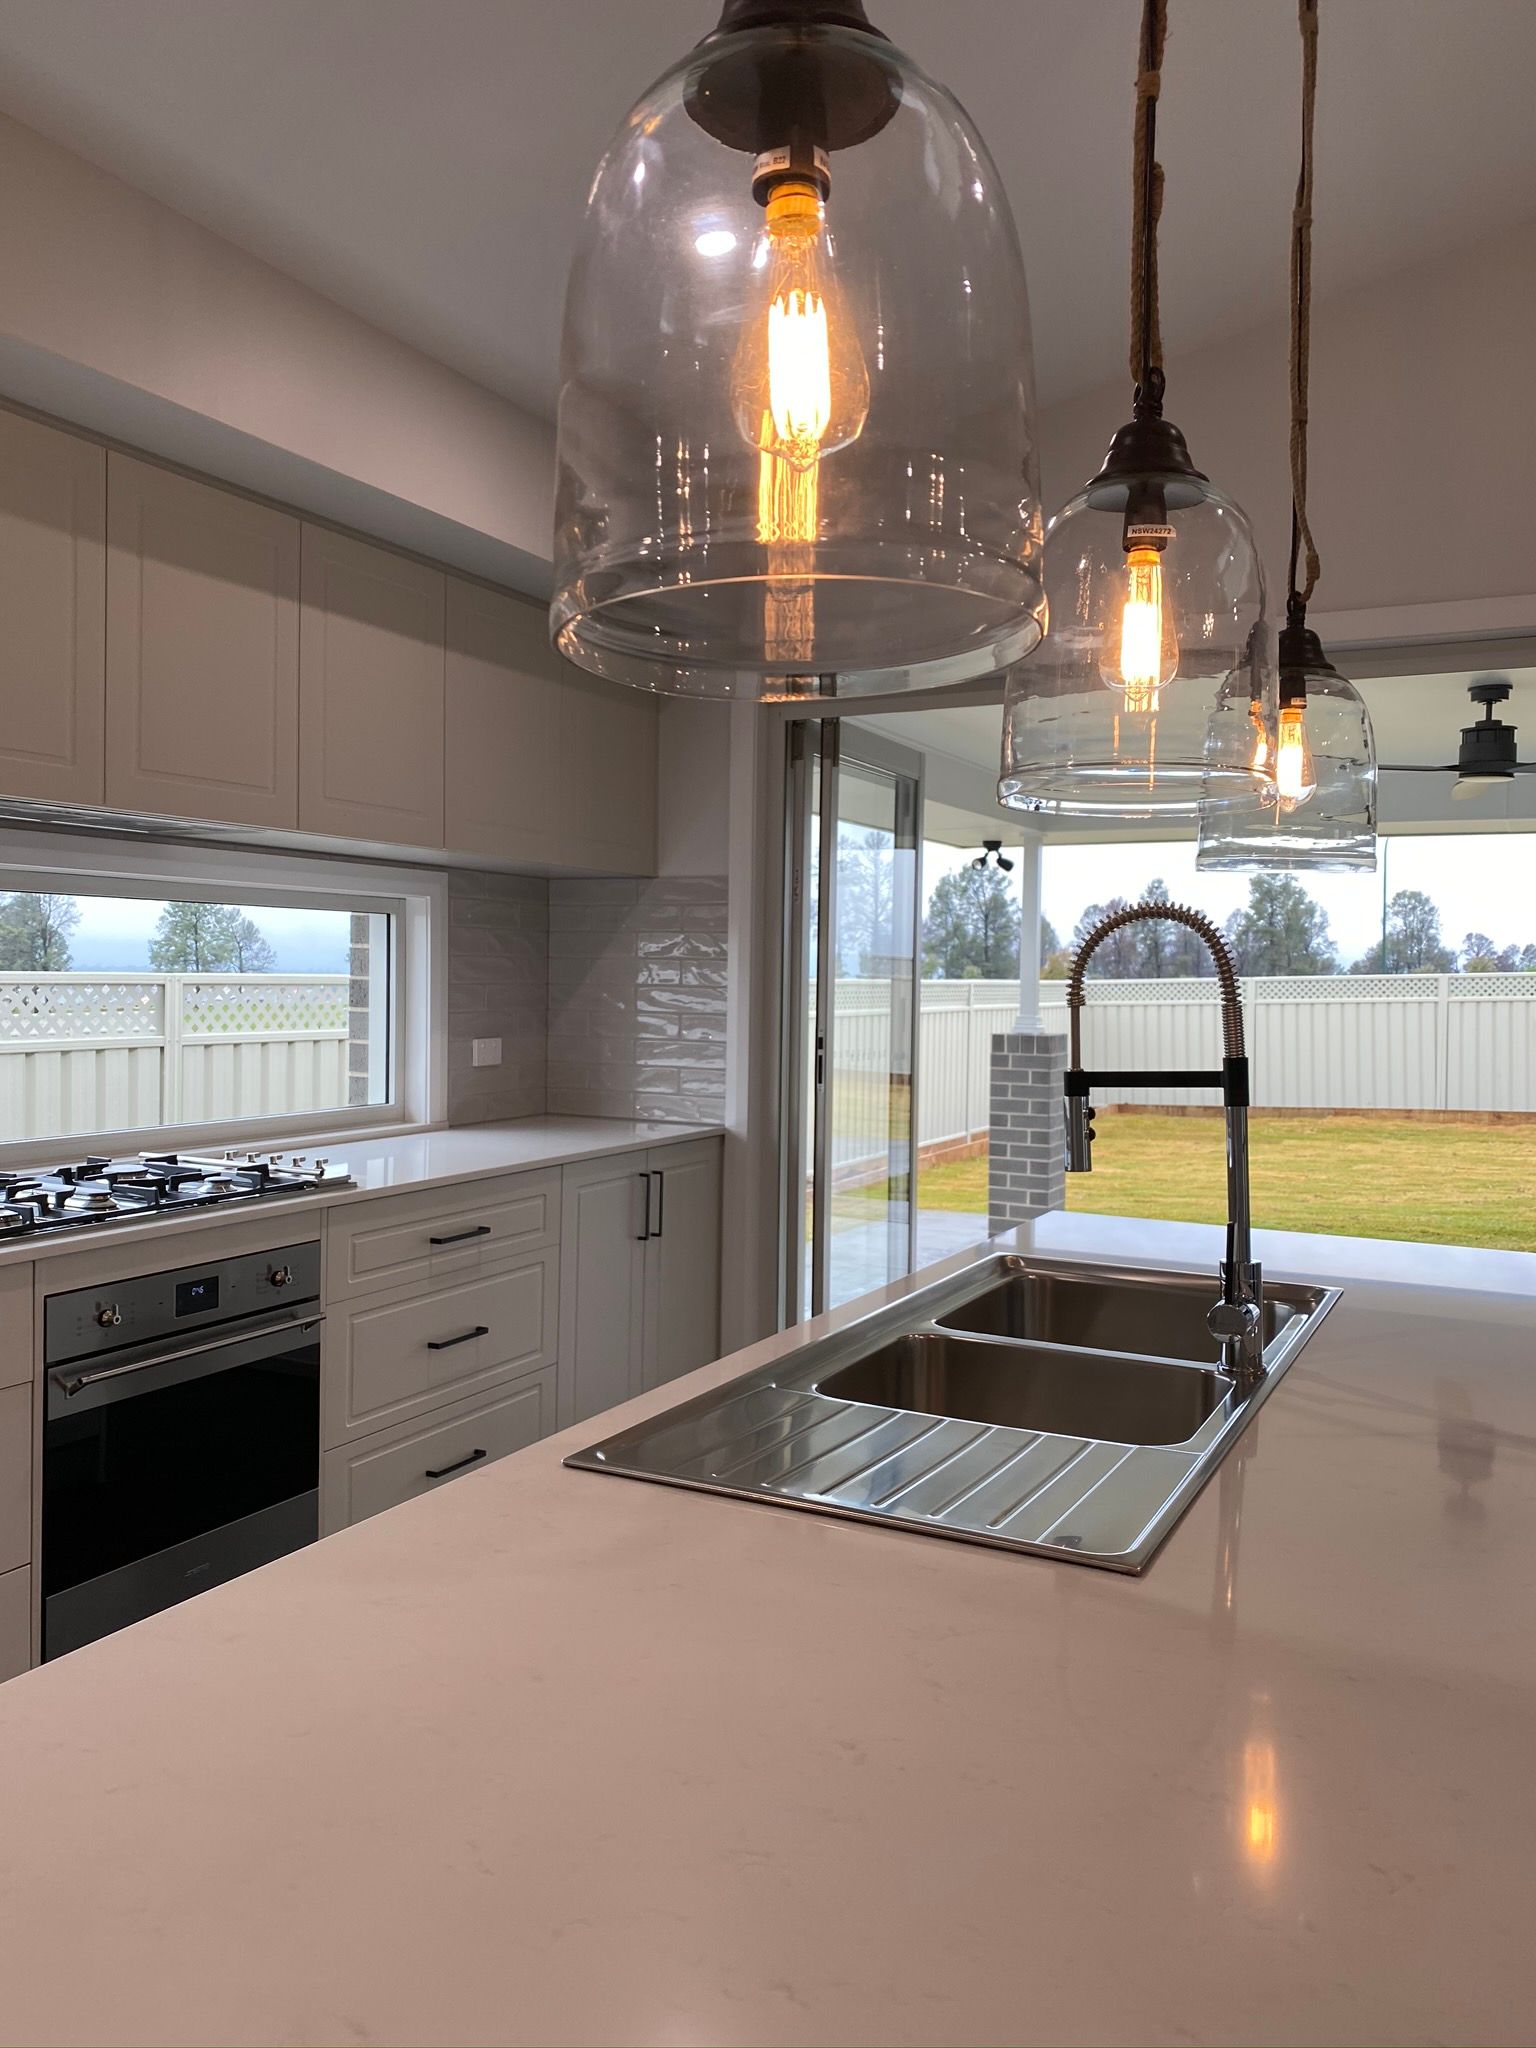 Modern Style of Kitchen Sink and Pendant Light — Kitchen Renovations in Dubbo, QLD